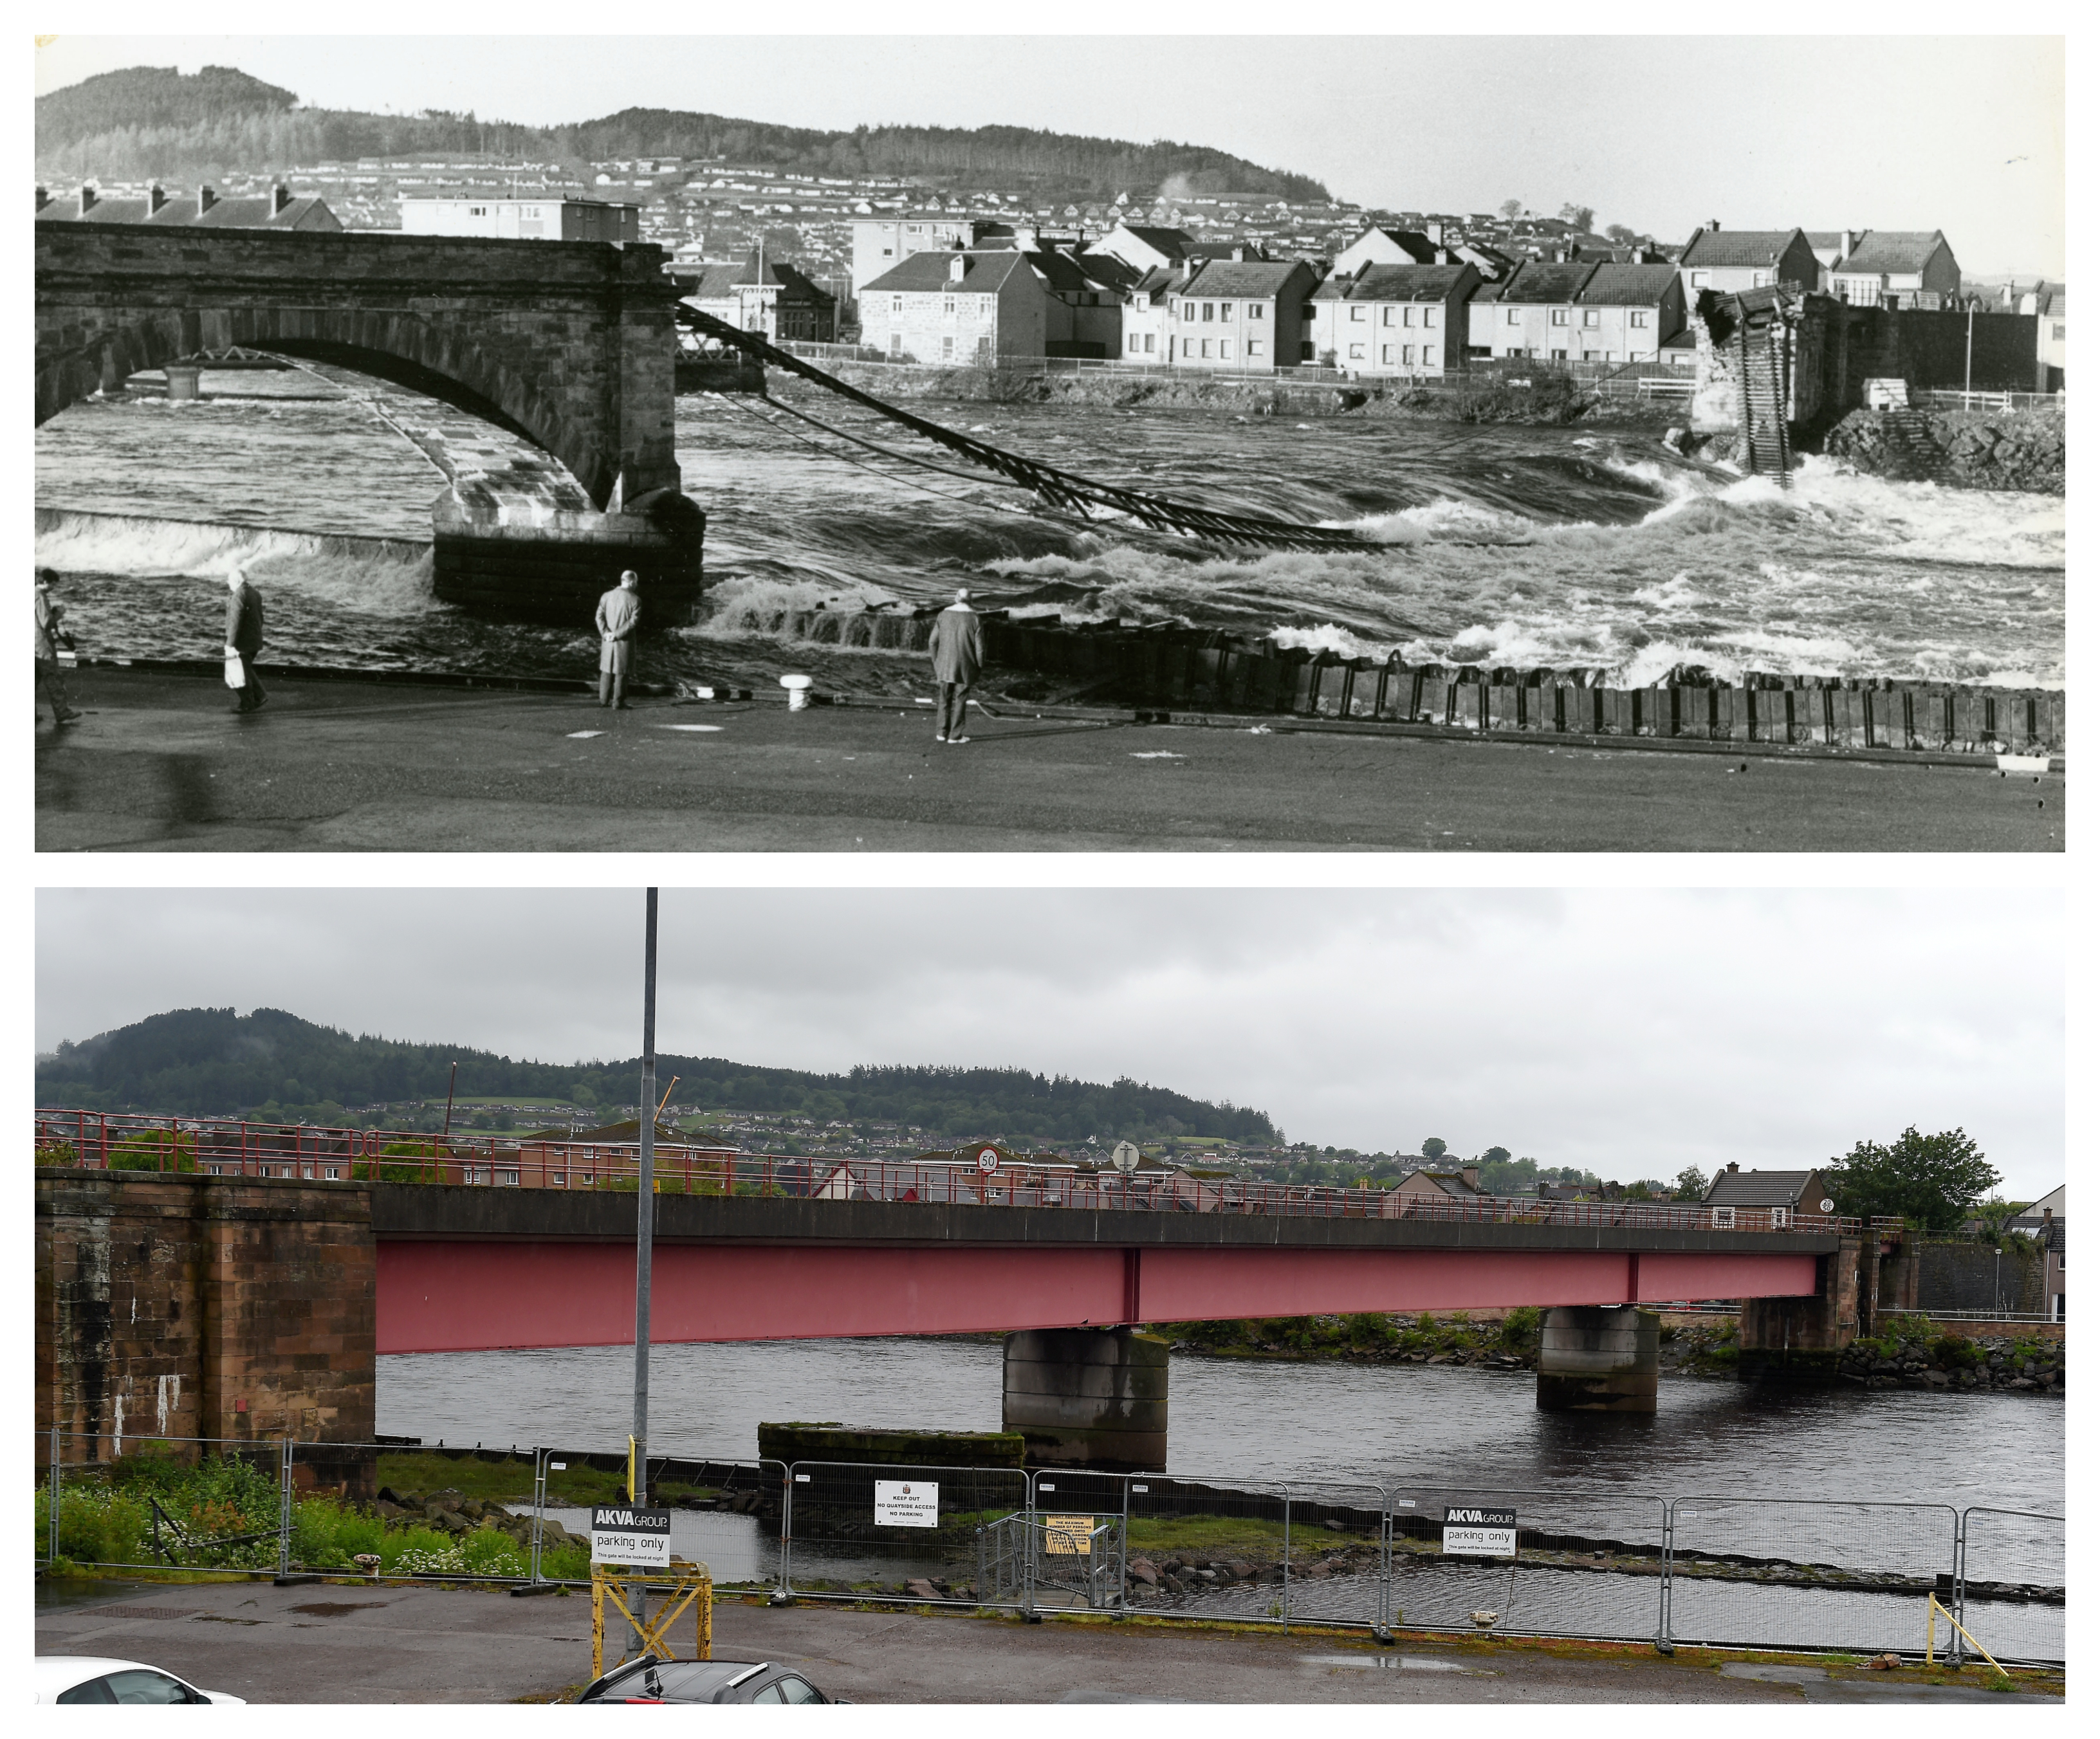 The old bridge in February 1989 and the new bridge as it appears now.
Pictures by David Murray (1989) and Sandy McCook (2019).